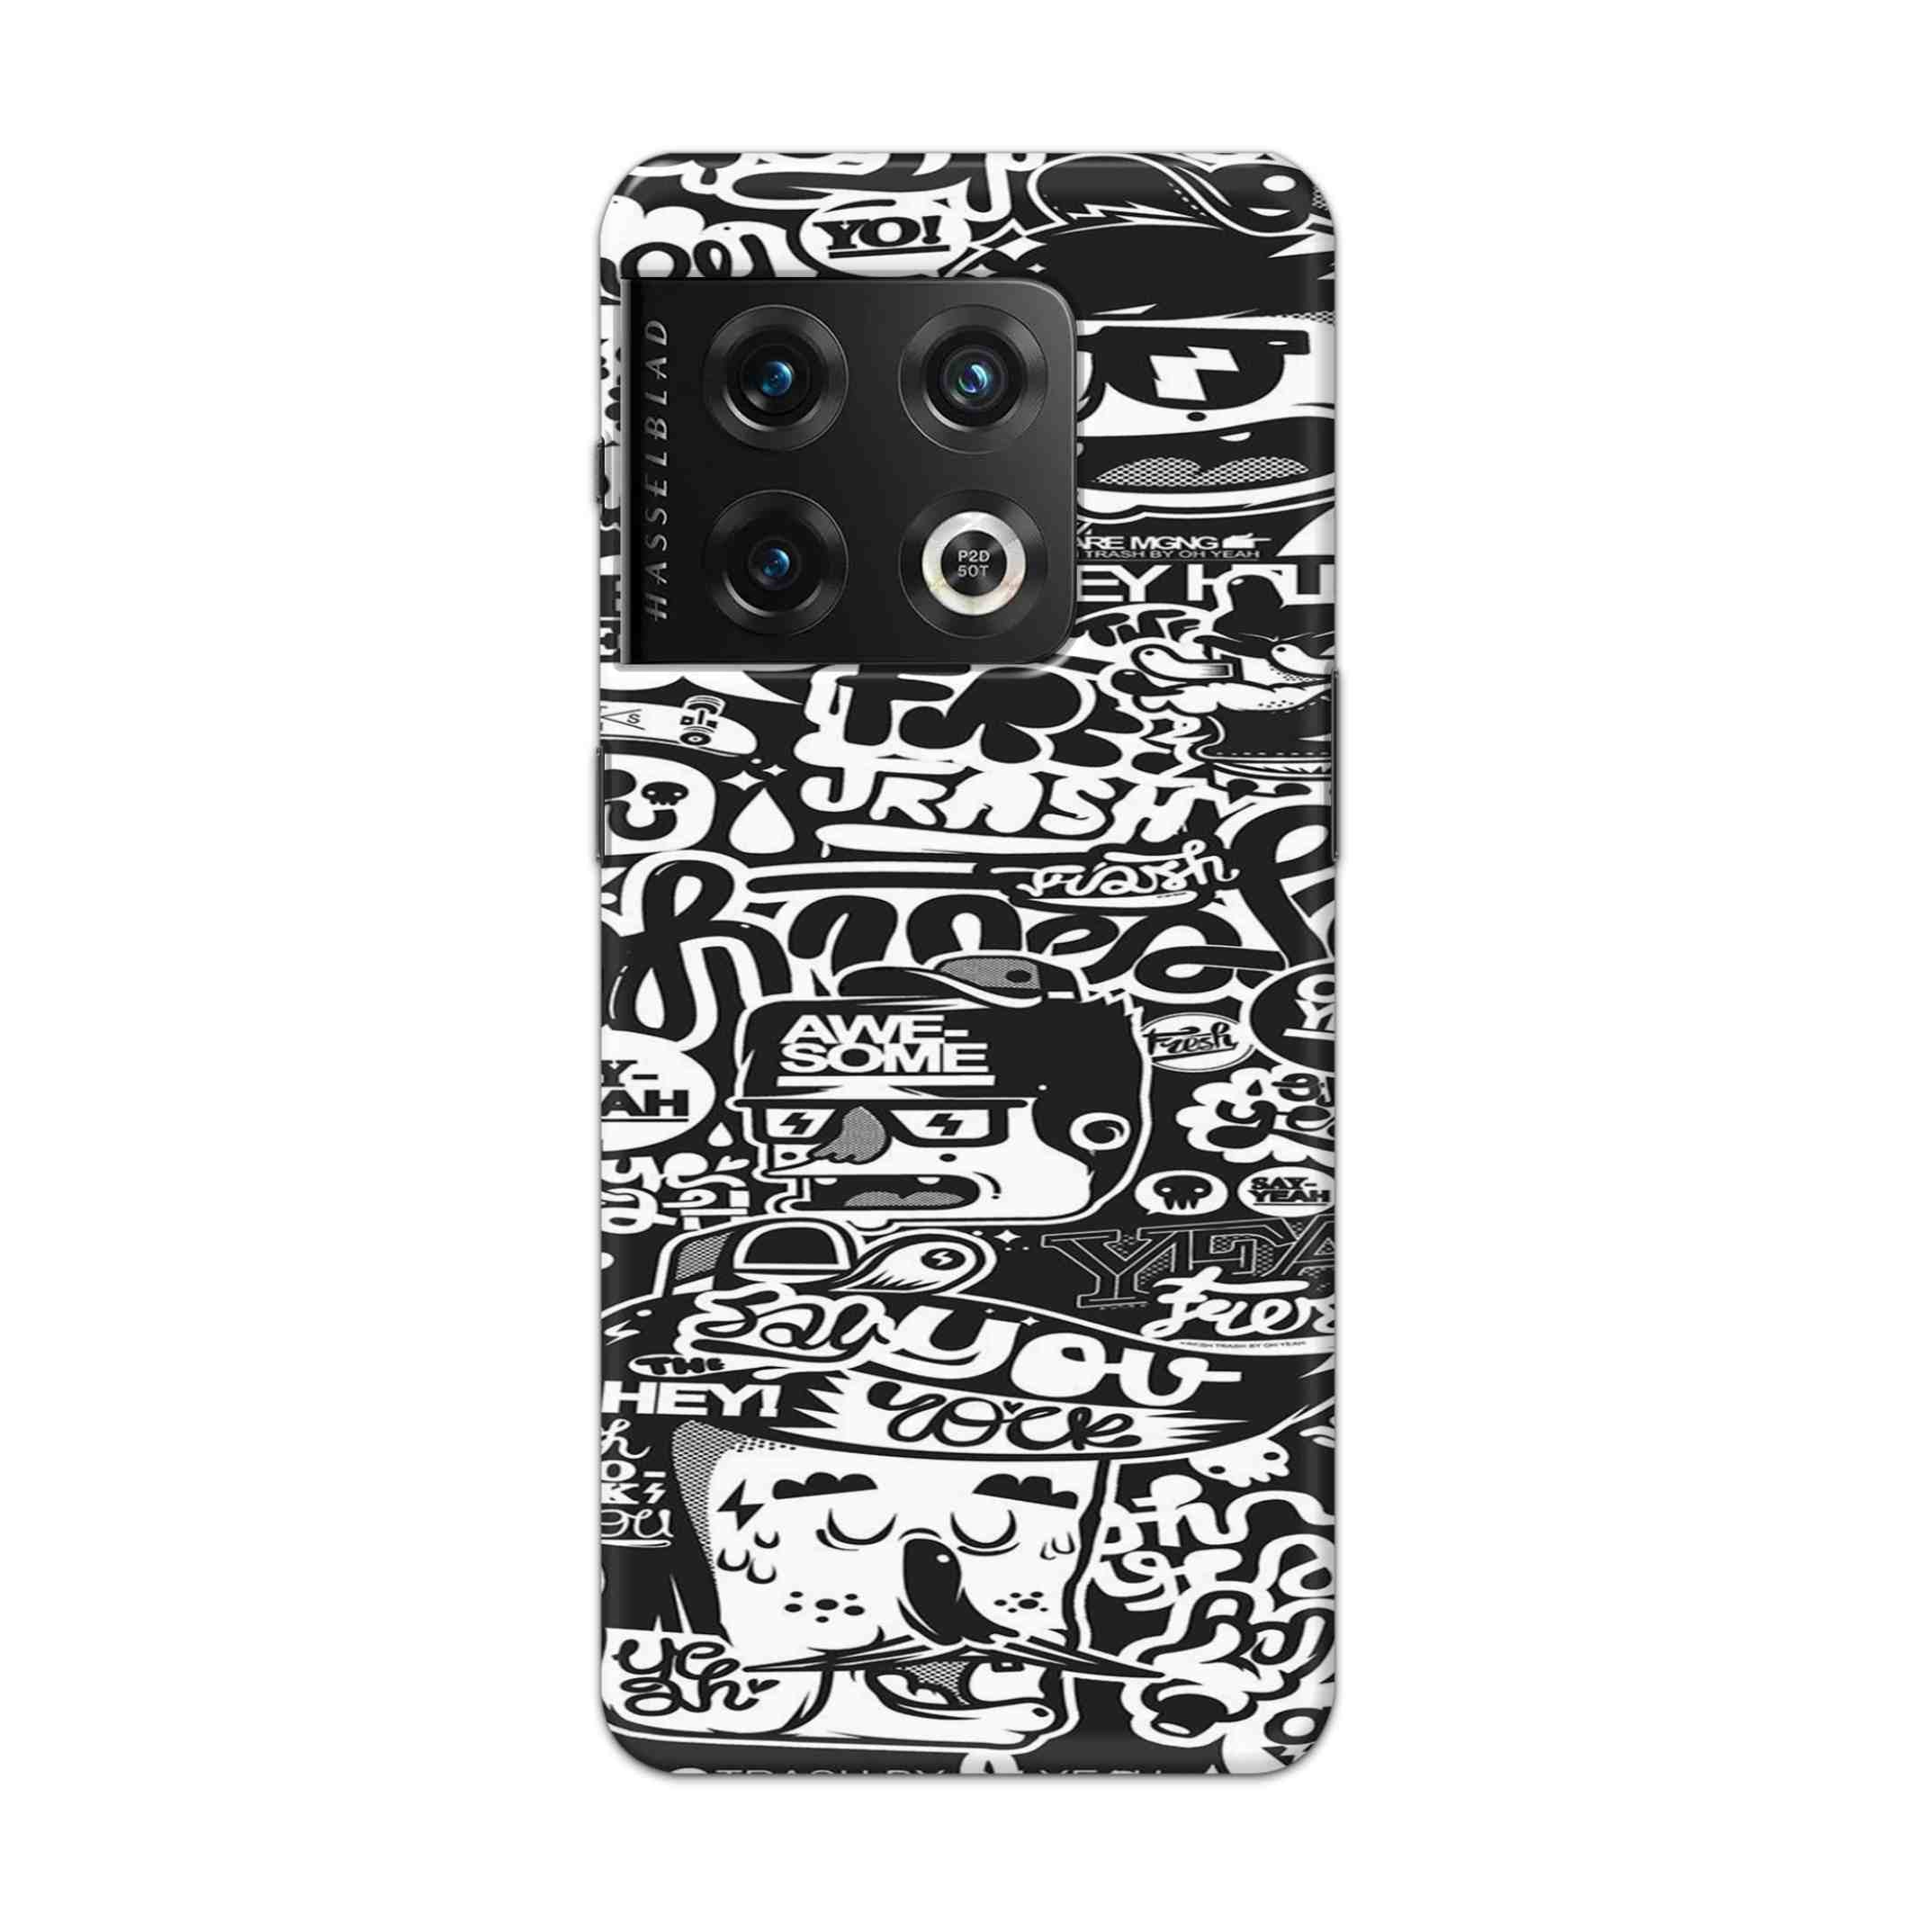 Buy Awesome Hard Back Mobile Phone Case Cover For Oneplus 10 Pro Online